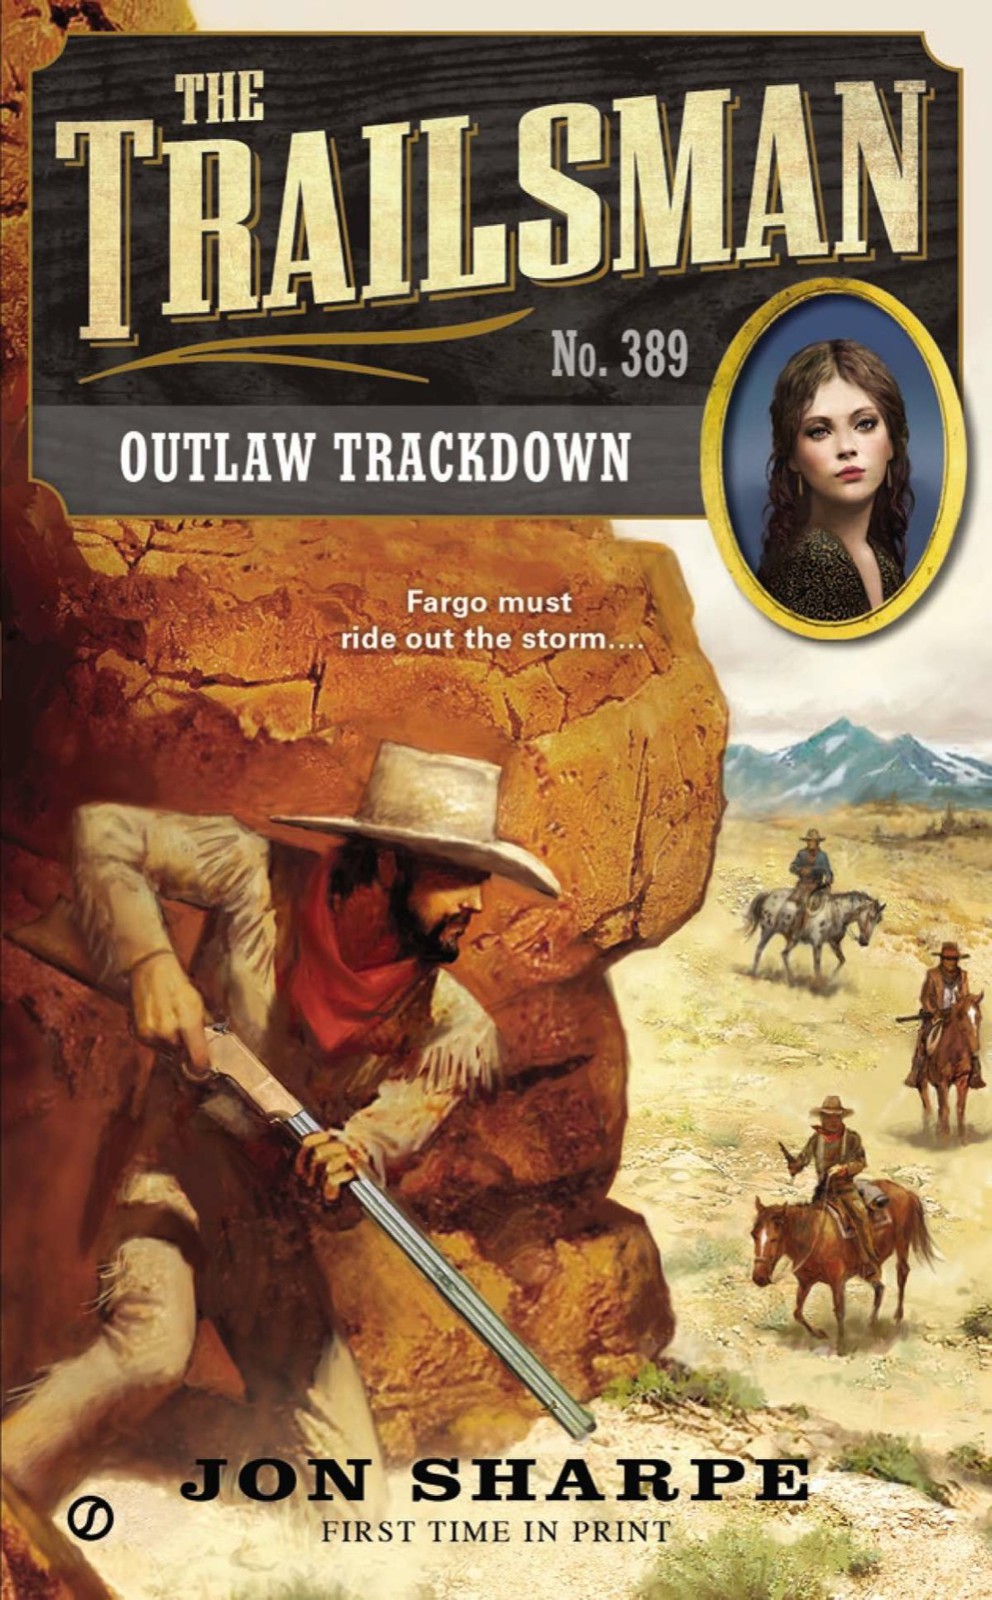 Outlaw Trackdown by Jon Sharpe